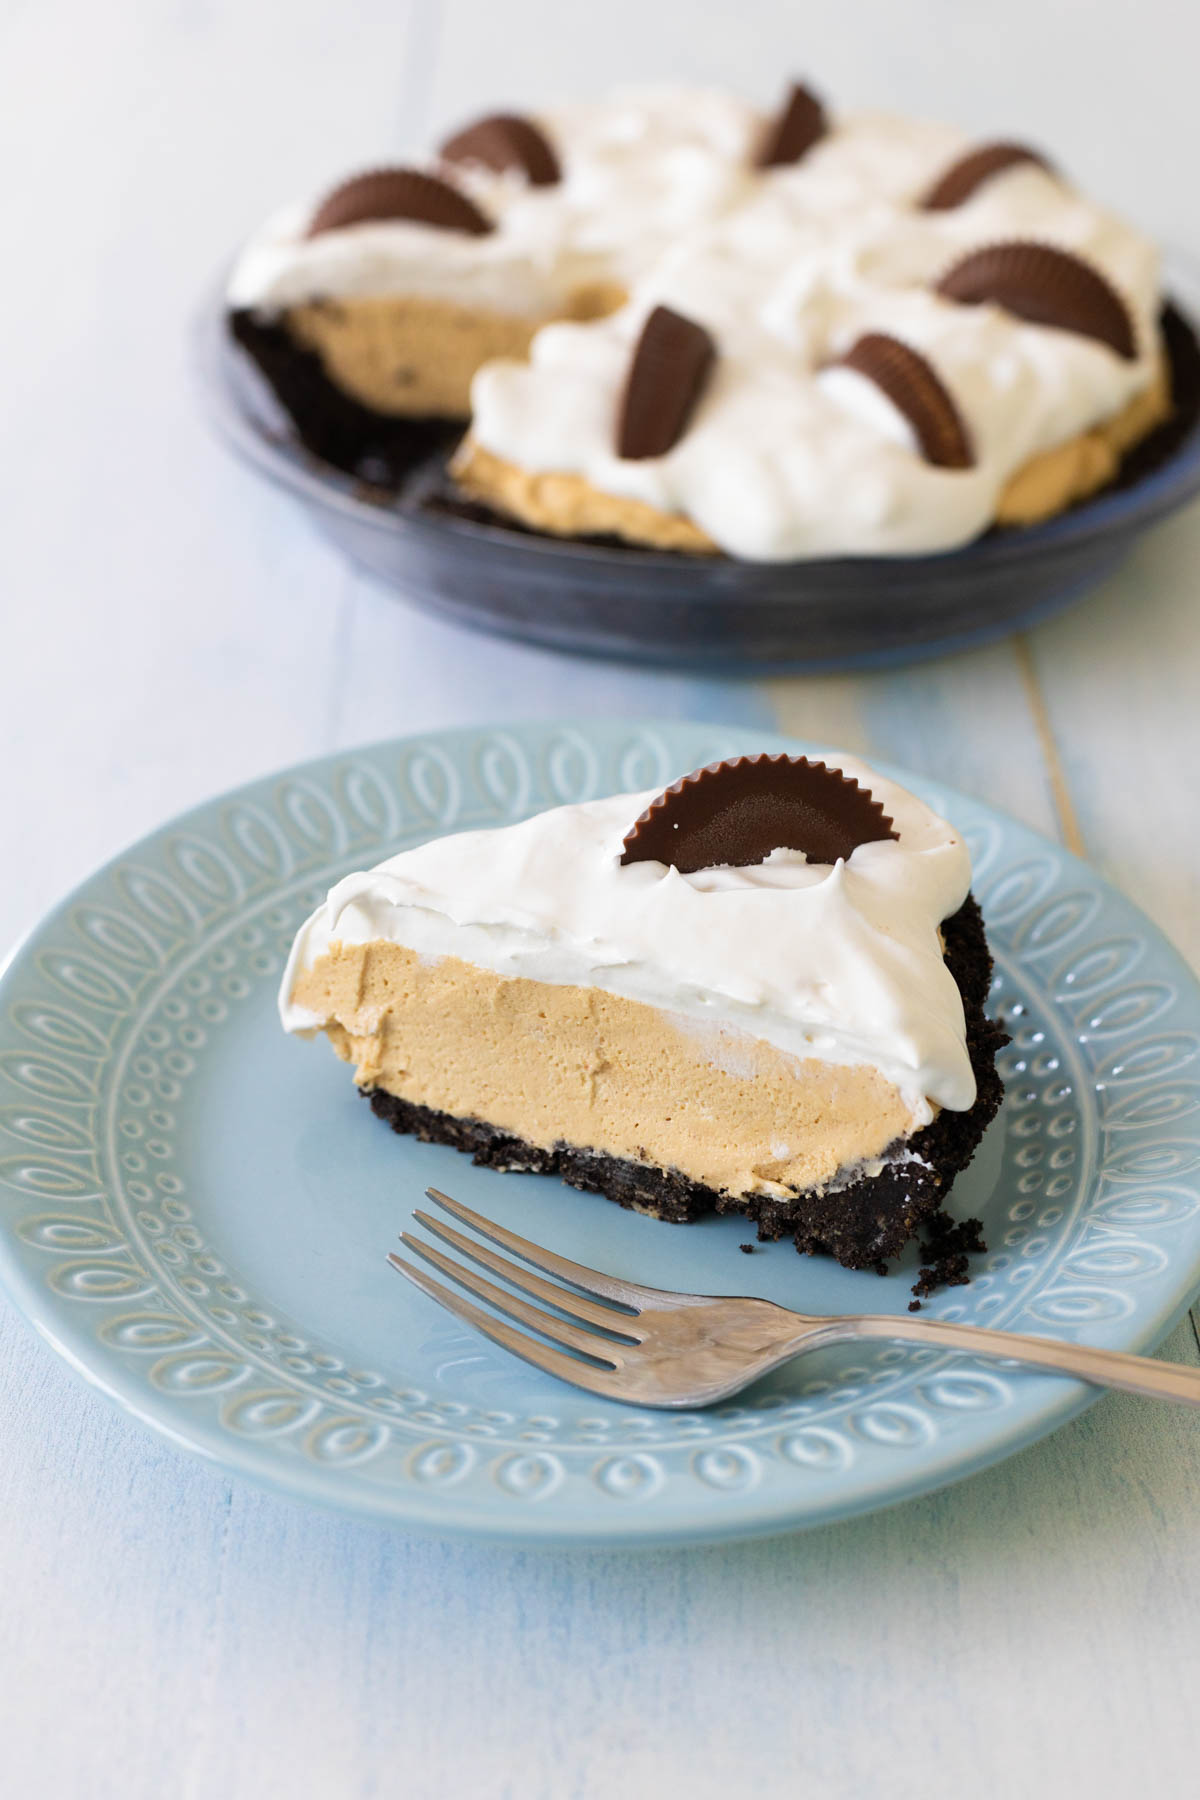 A slice of peanut butter pie is on a blue plate next to the full pie plate.